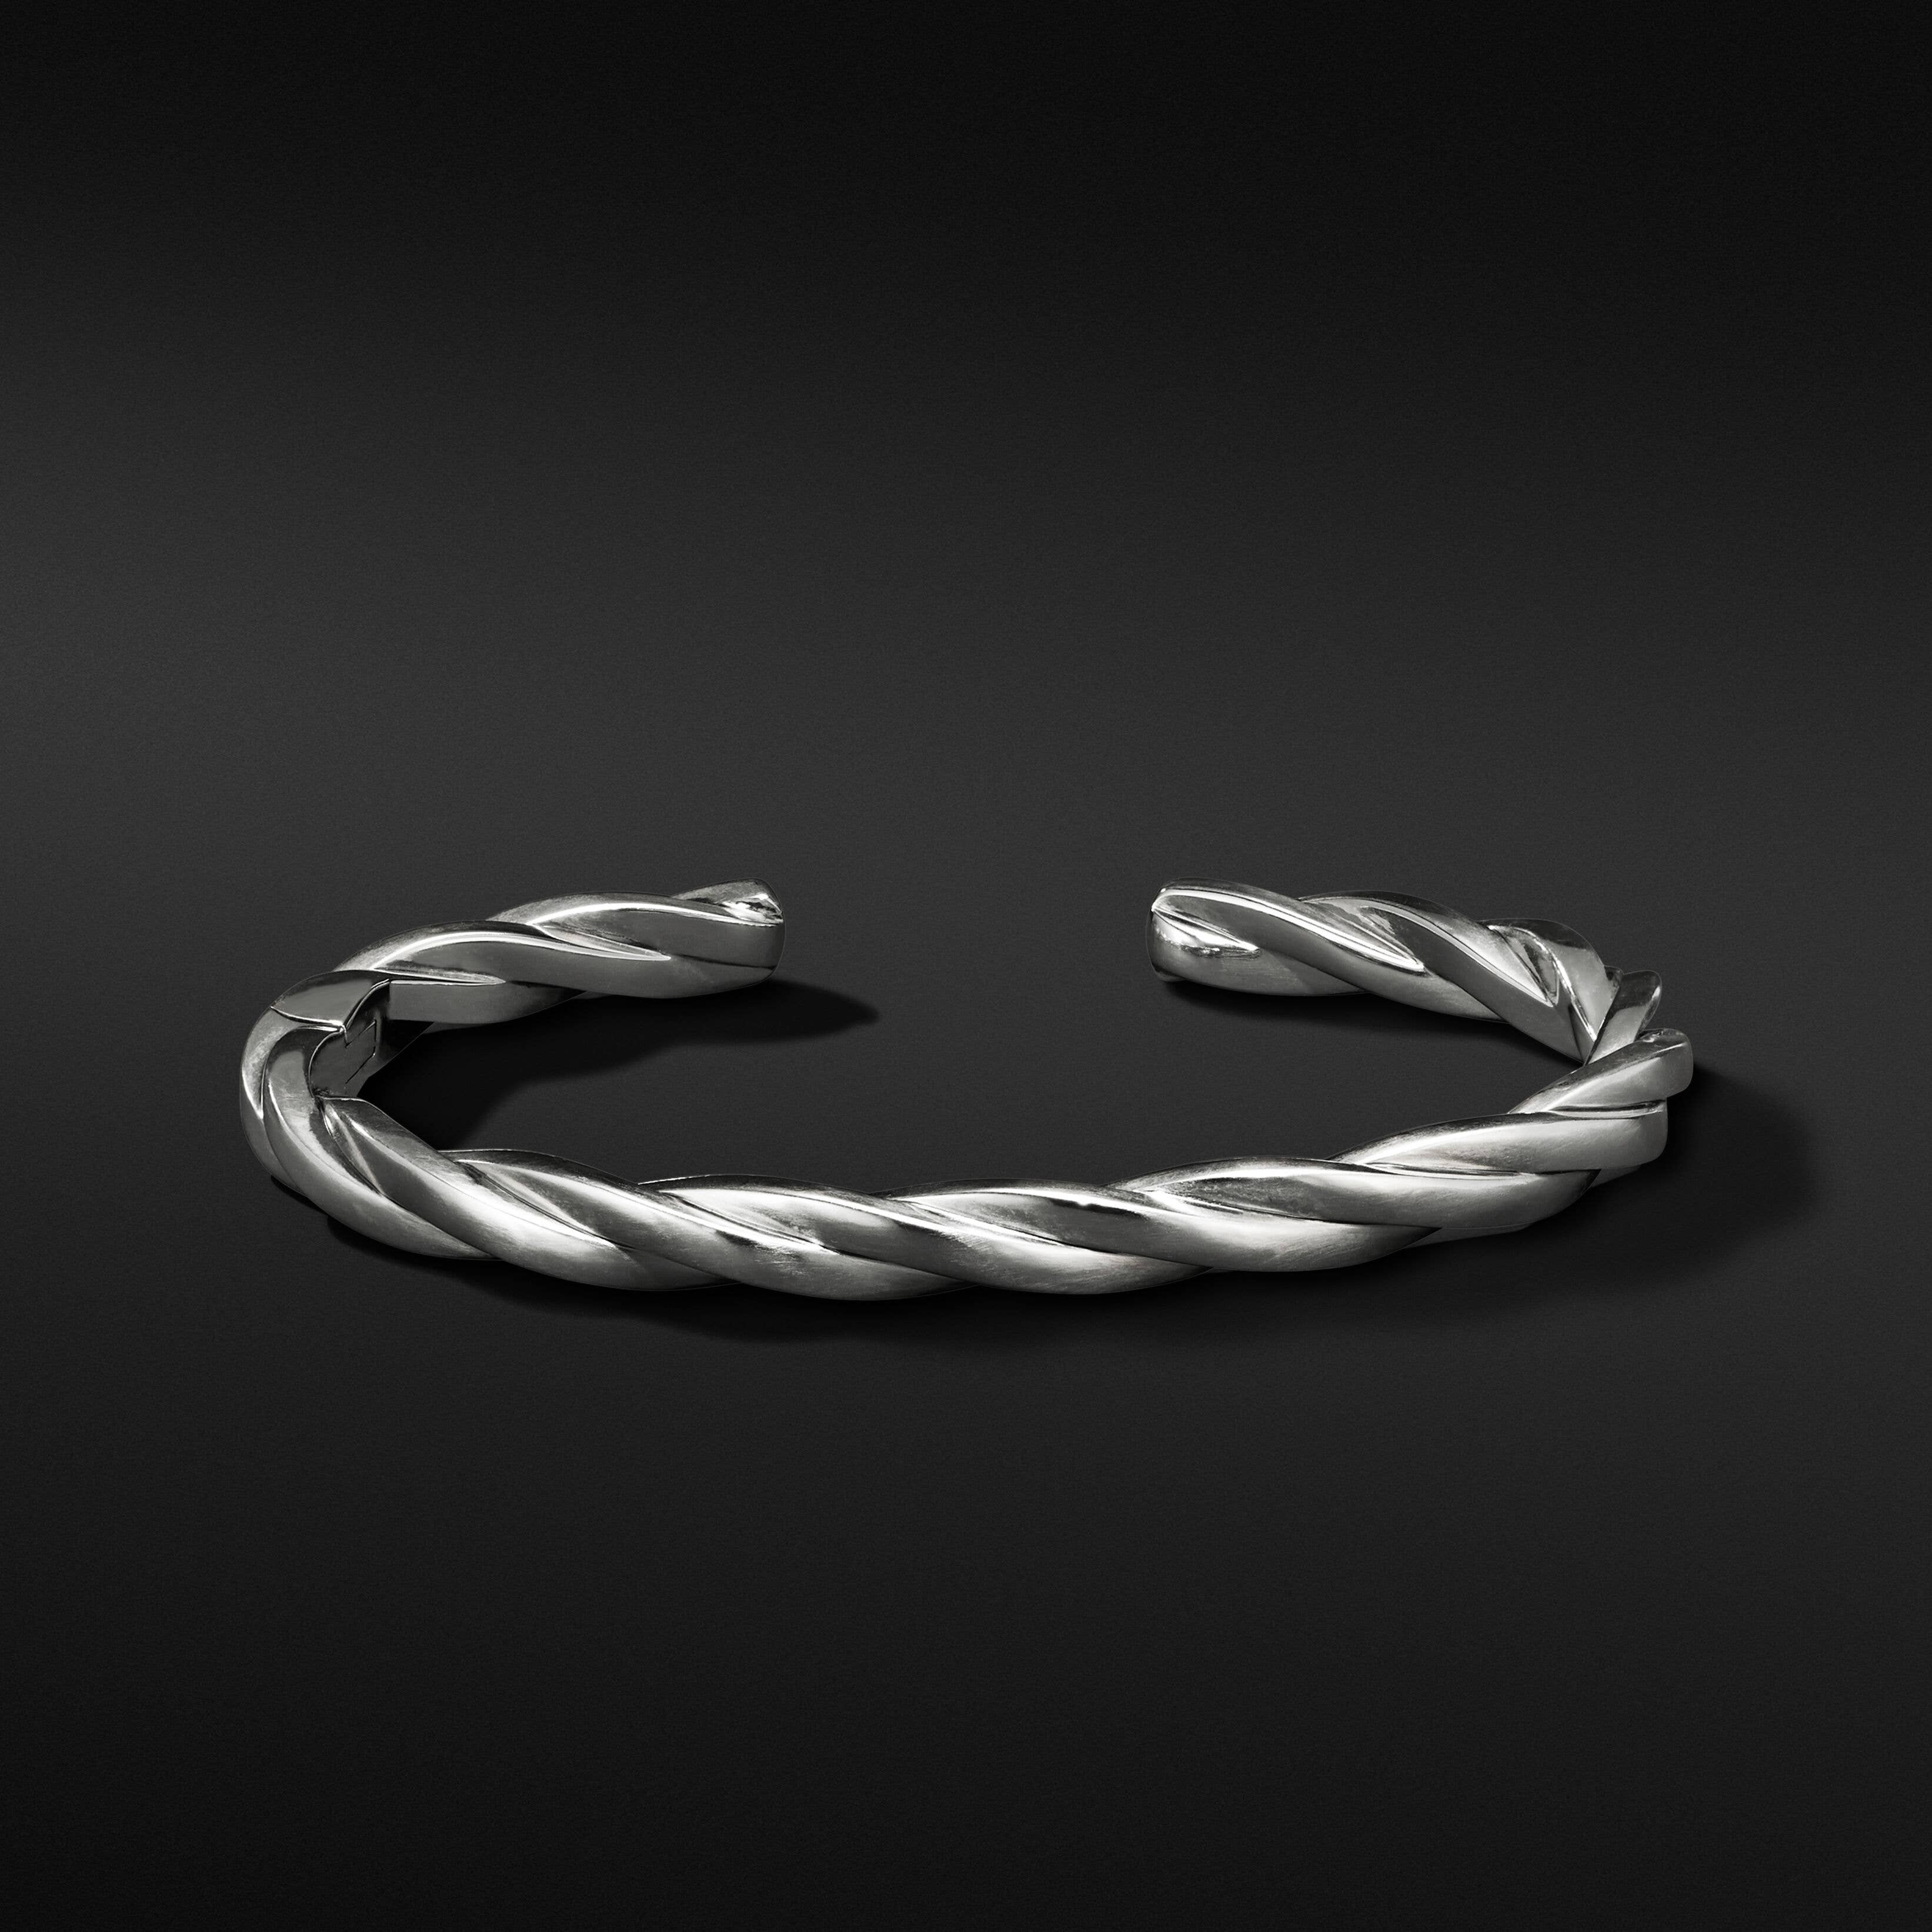 Cable Twisted Cuff Bracelet